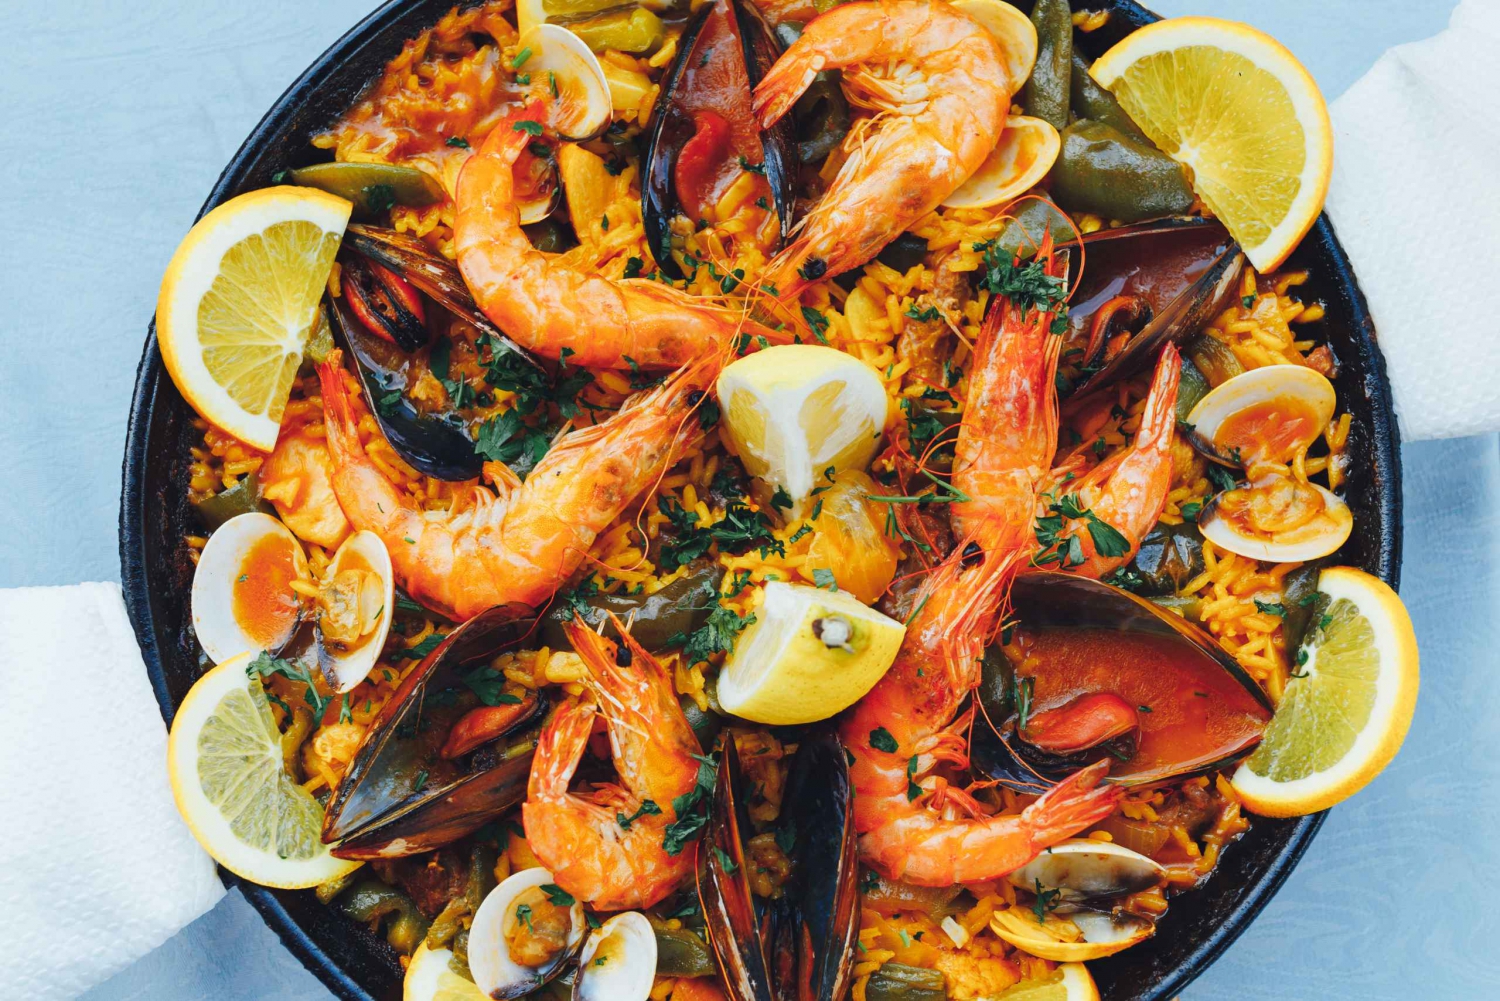 Mallorca: Dinner Experience with the Famous 'Paella Man'